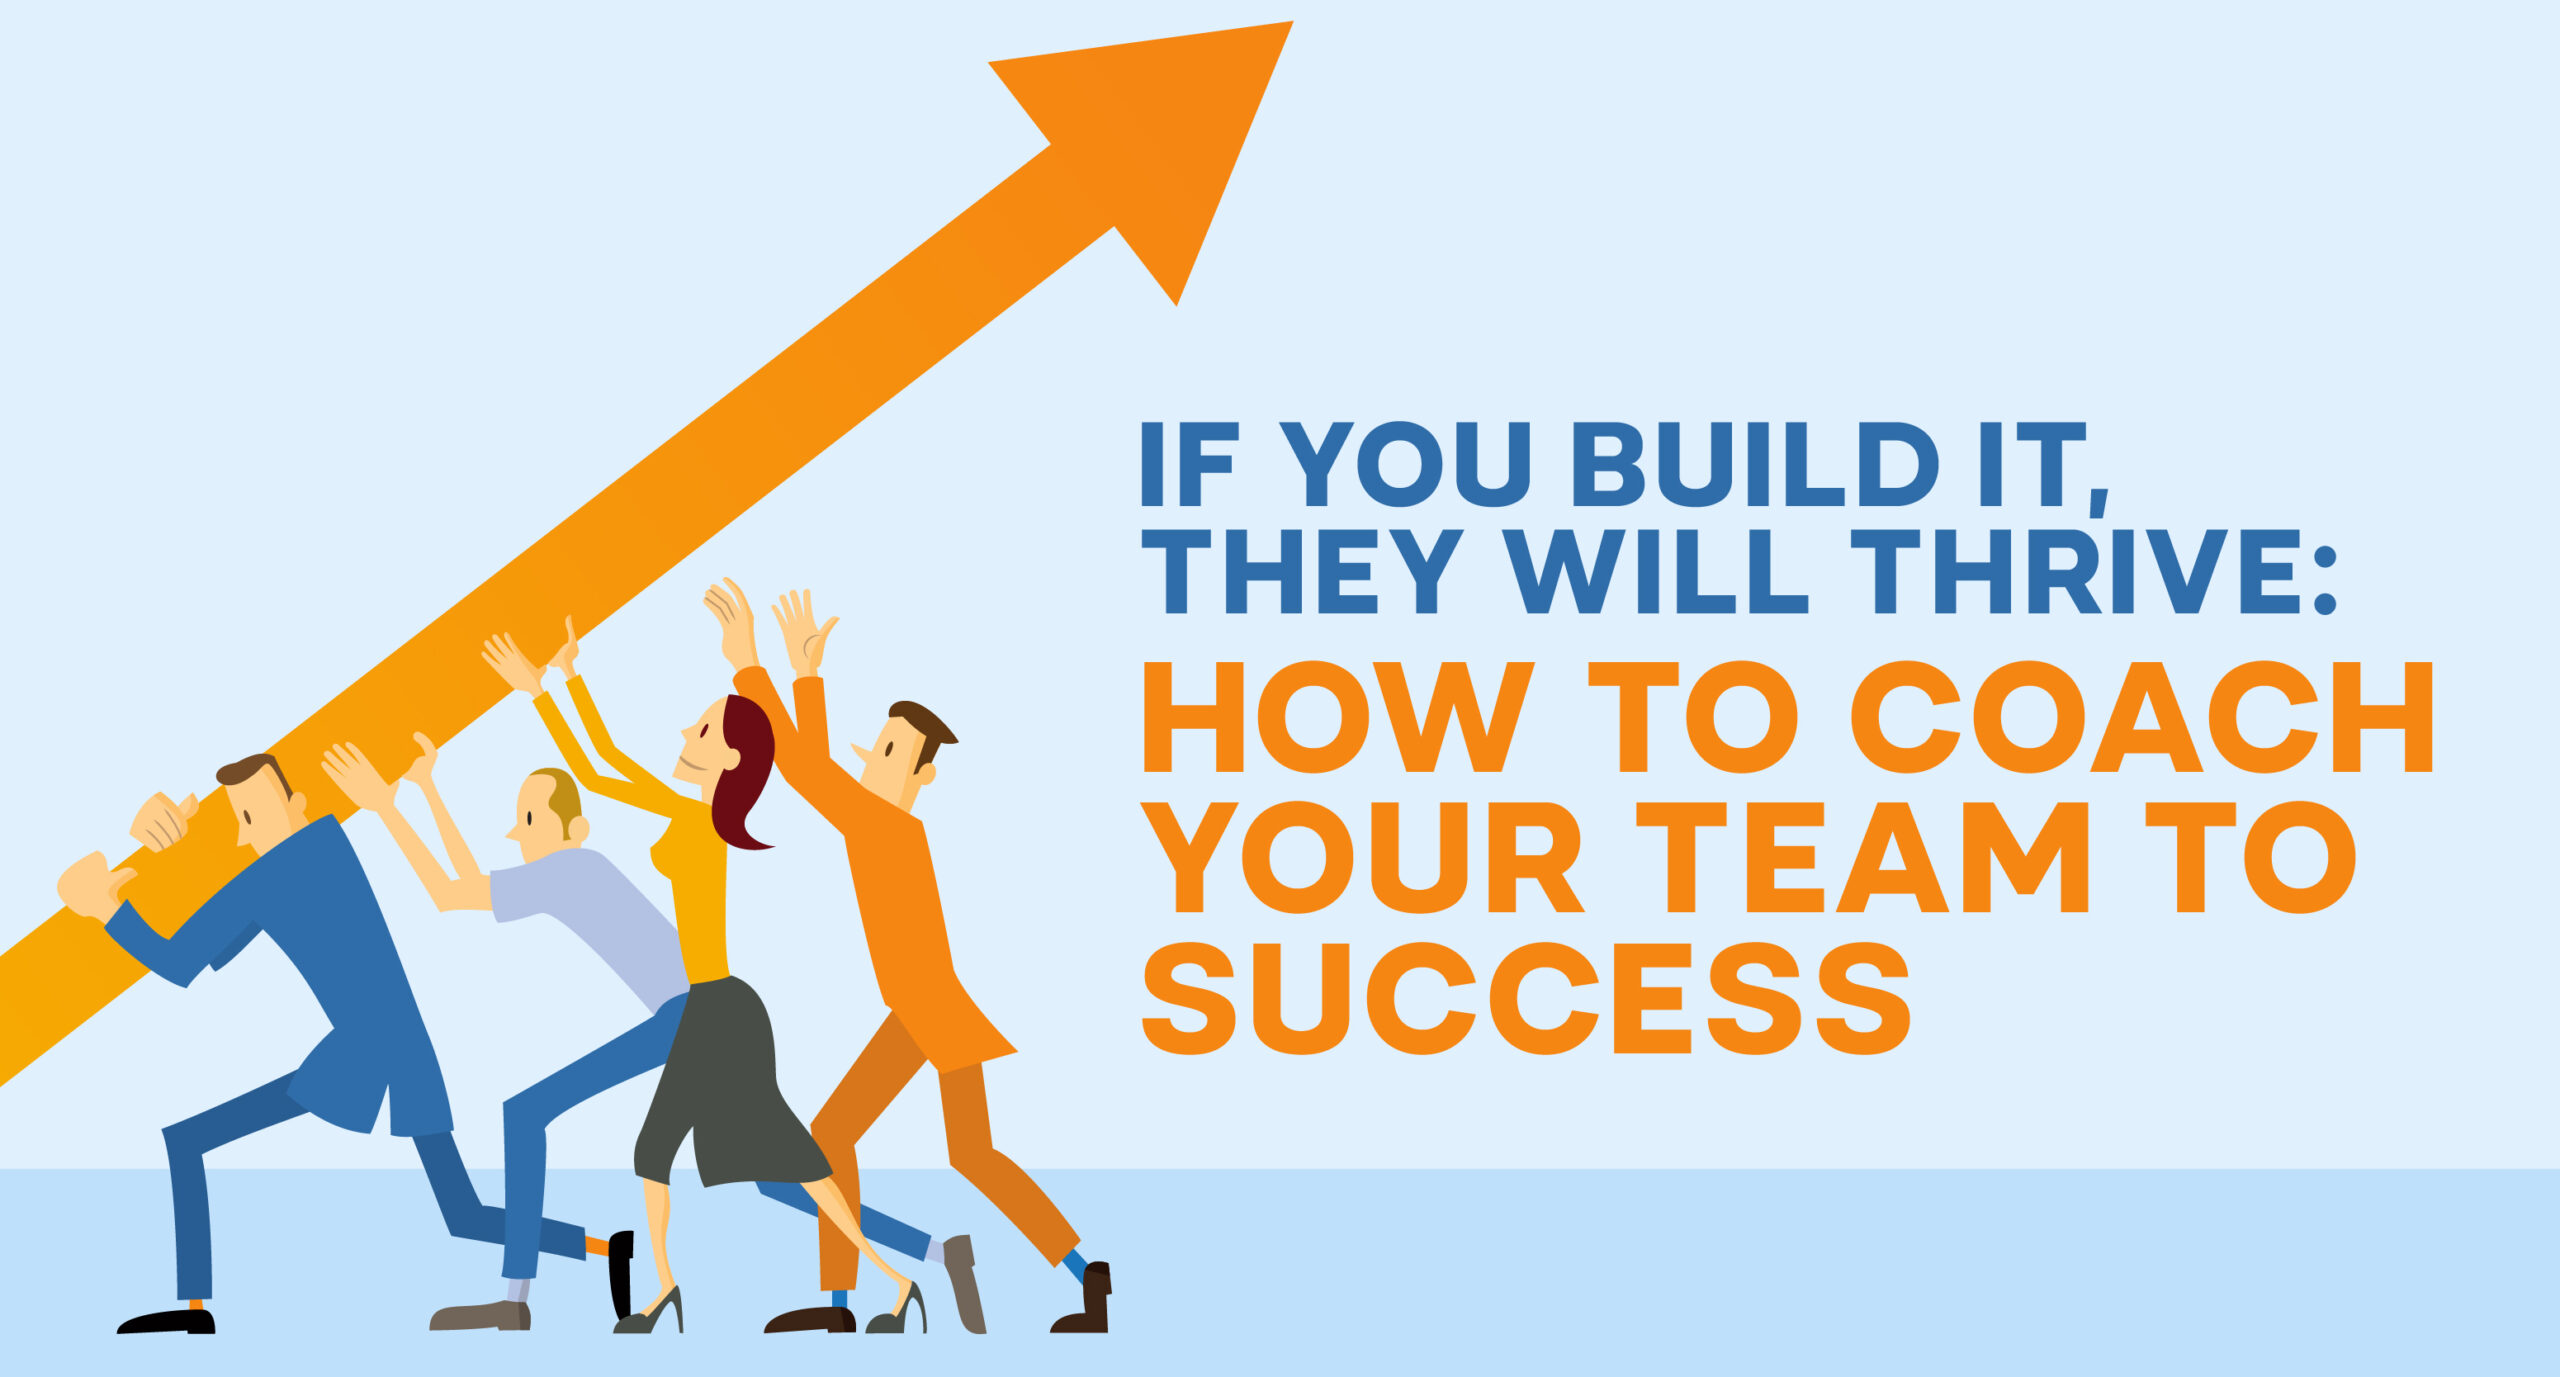 How to Coach Your Team to Success